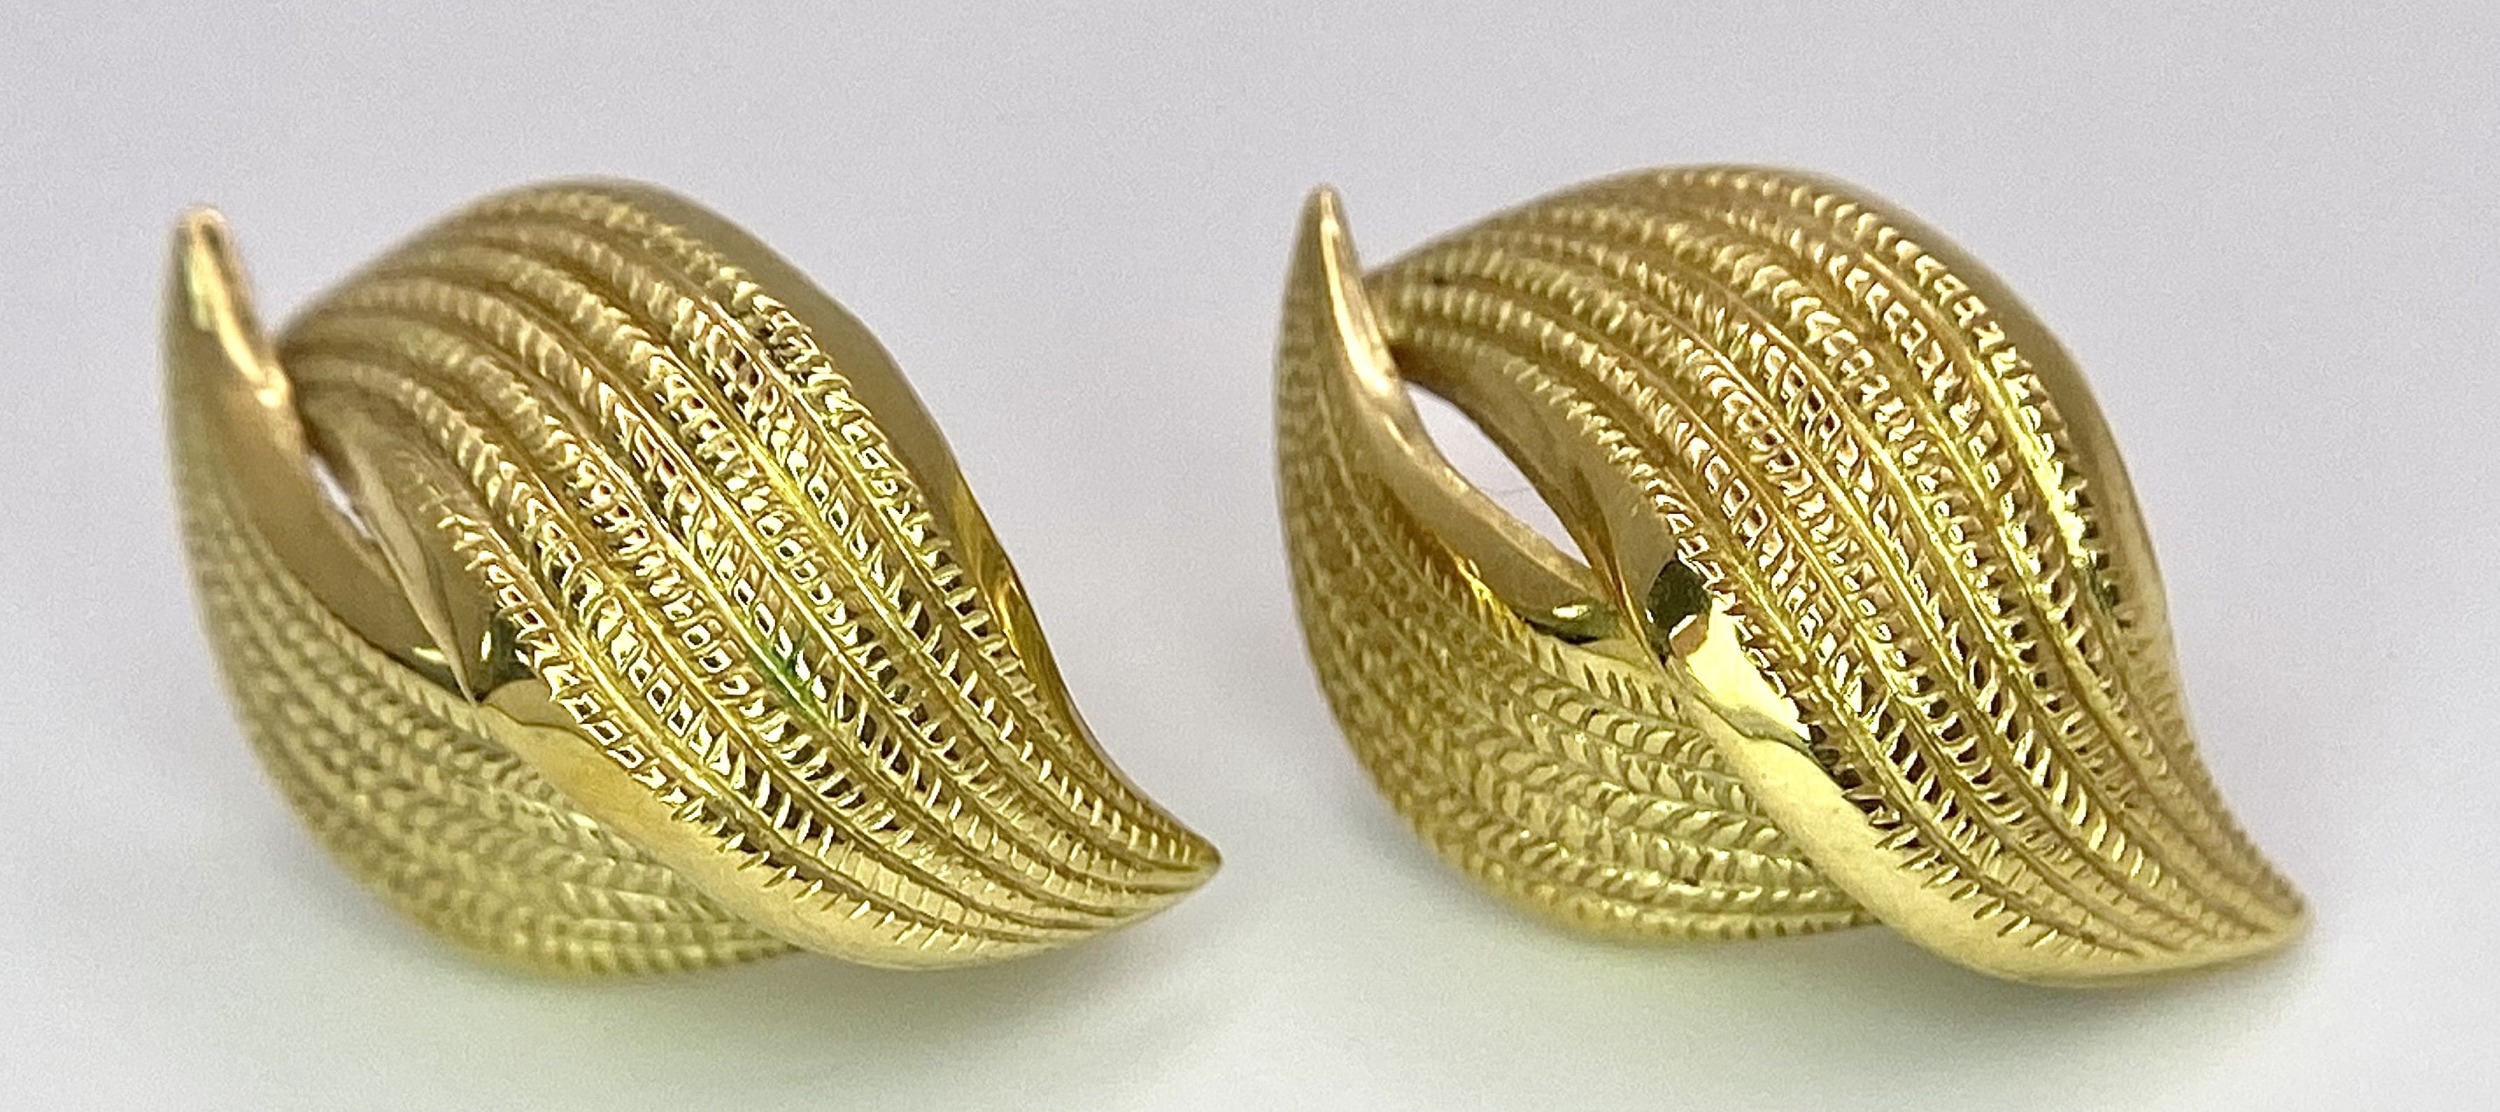 A Pair of 18K Yellow Gold Decorative Leaf Earrings. 3.2g - Image 2 of 7